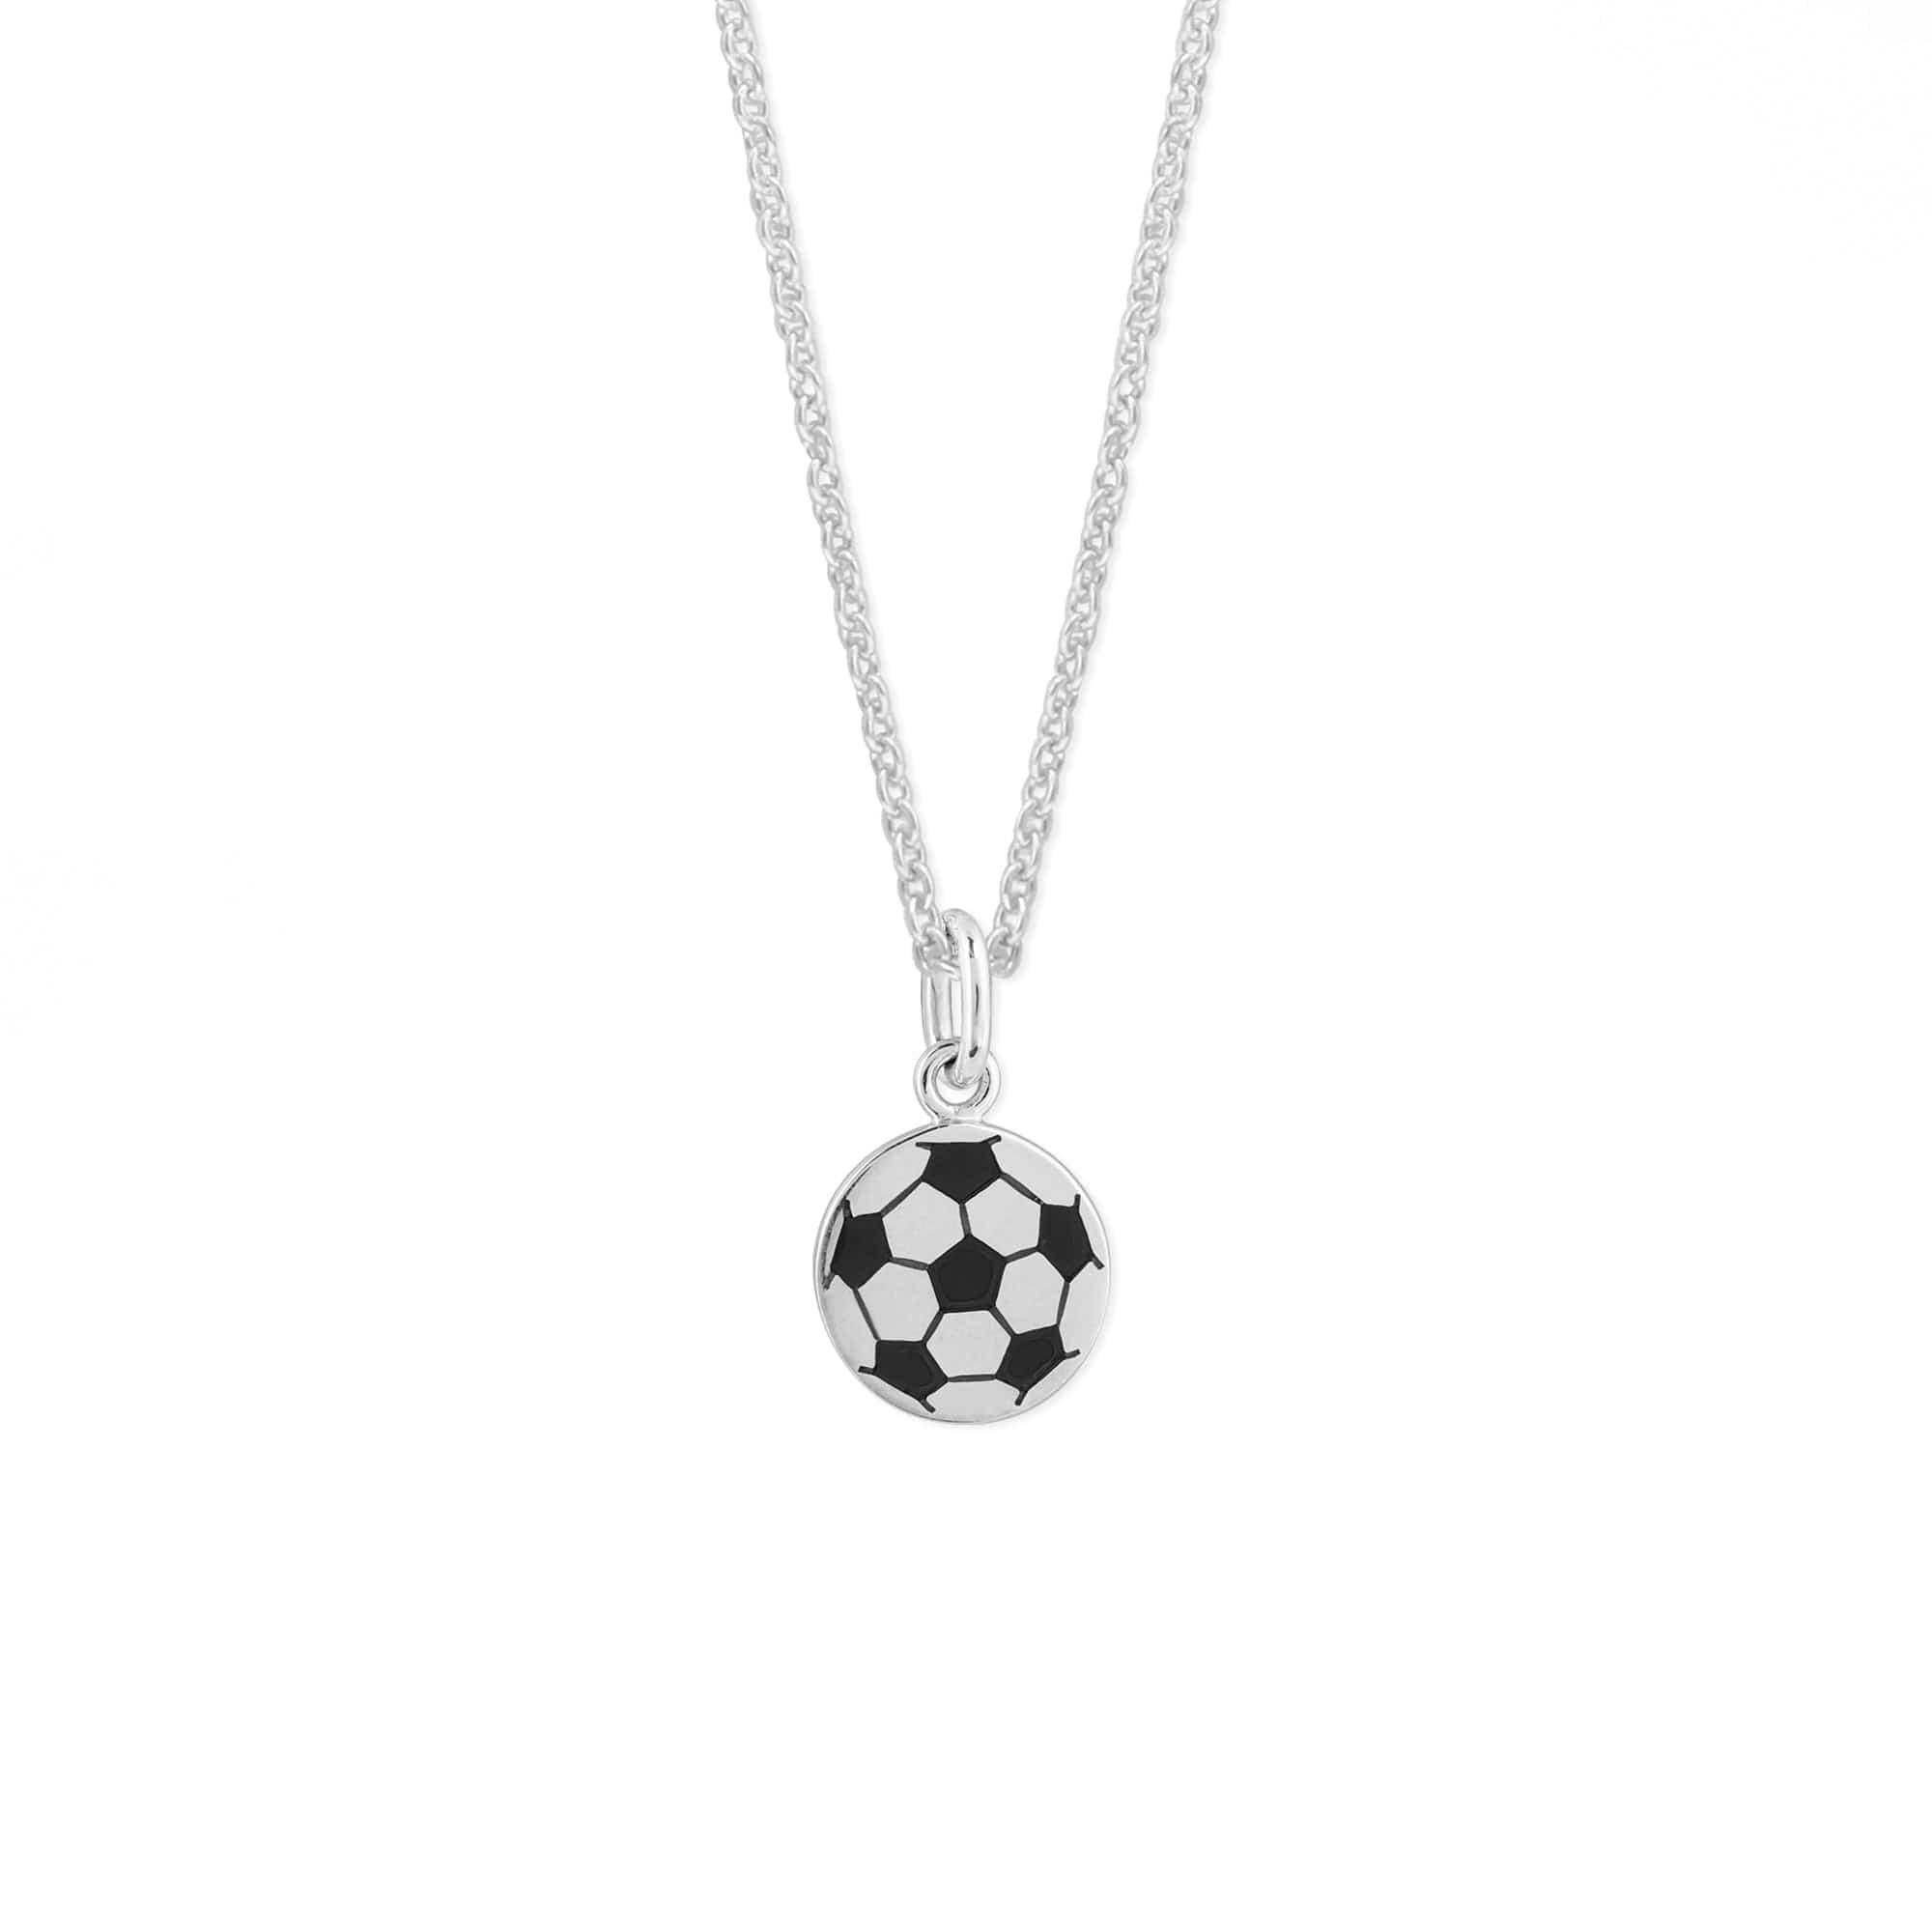 Boma Jewelry Necklaces Soccer Ball Necklace